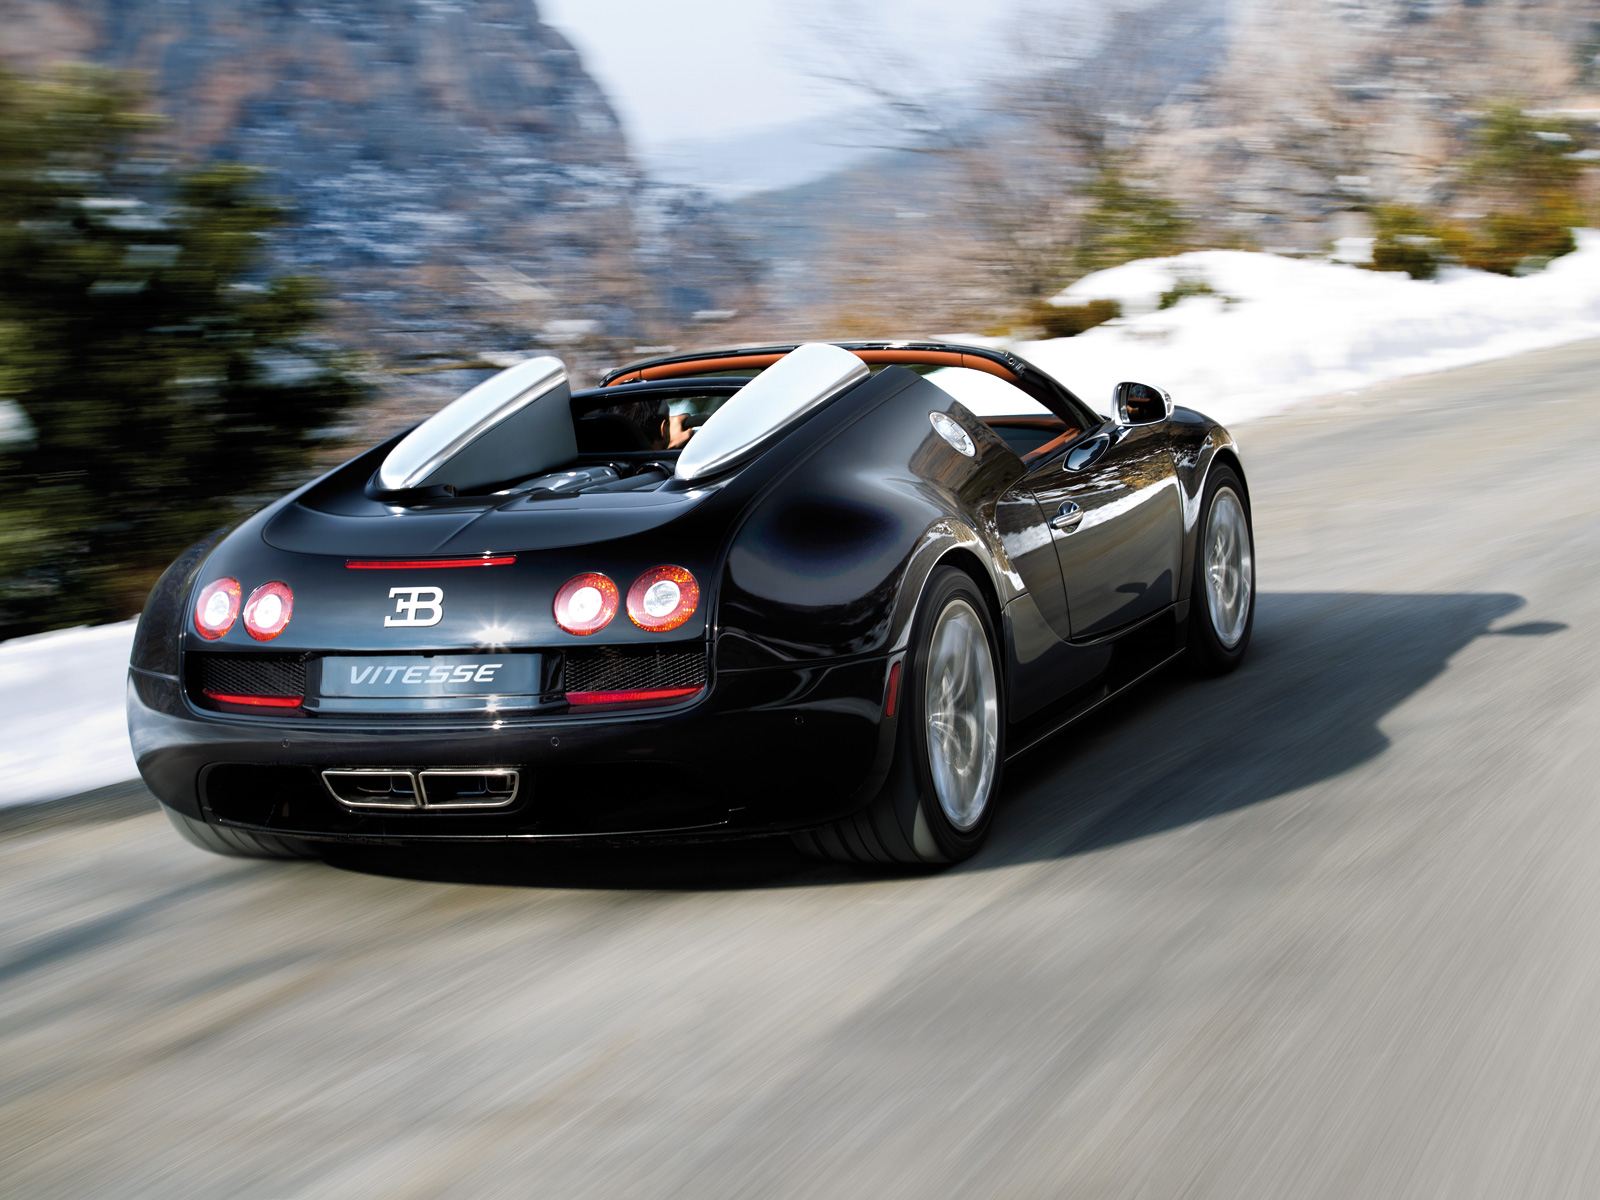 Bugatti Grand Sport is a Convertible with a starting MSRP of 1,990,000Top Speed 253 MPH, 0-60 2.7 in Seconds